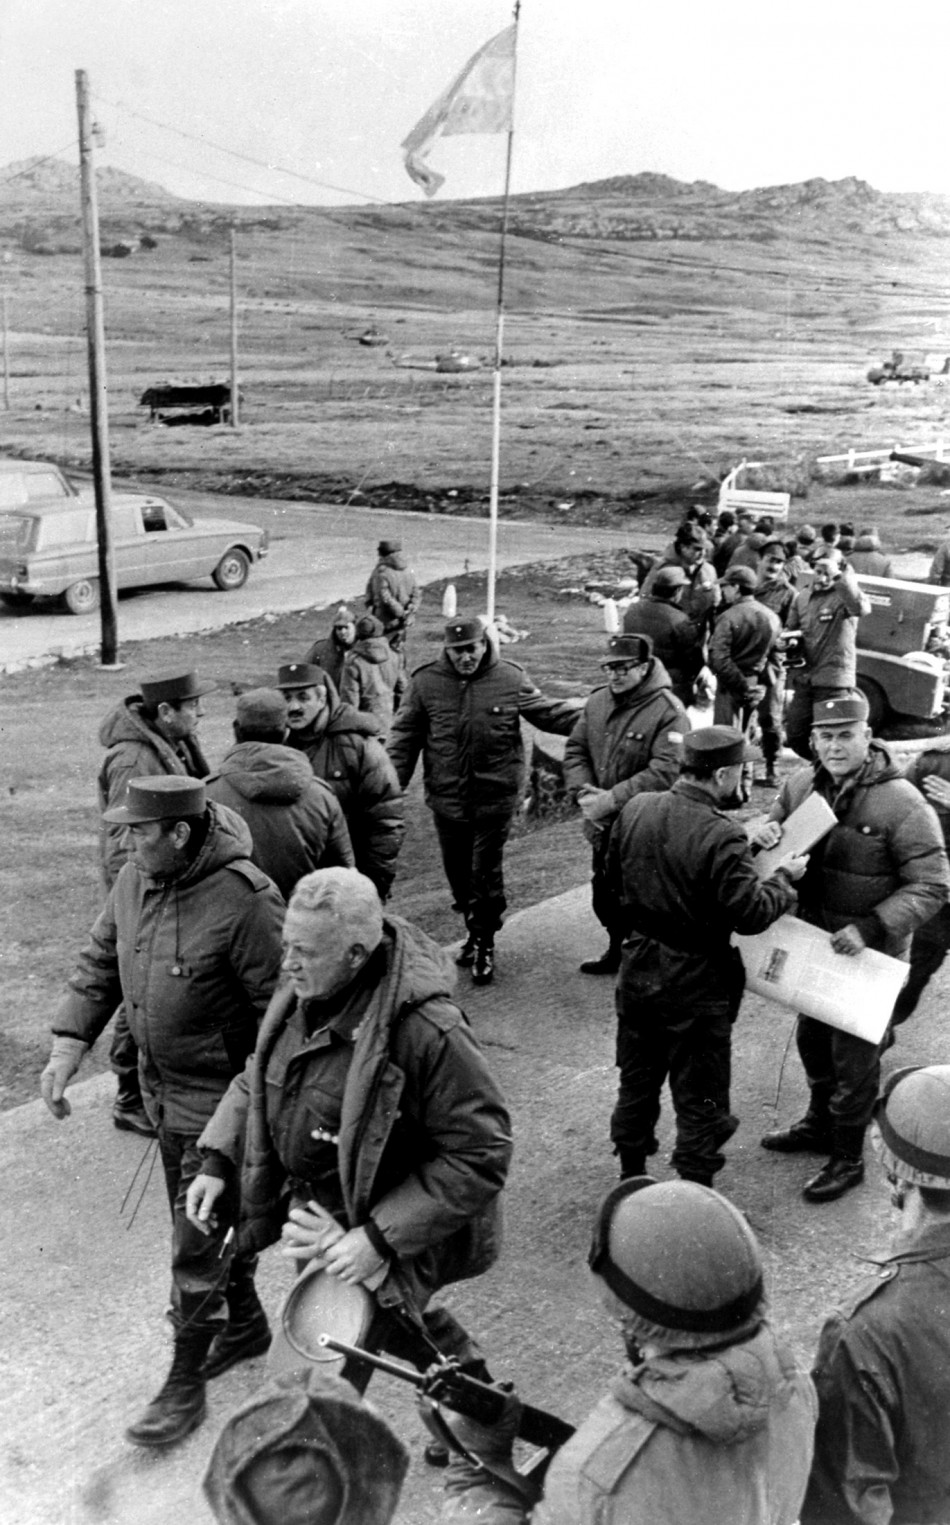 Historic Images of the Falklands War Depicting 30-Years of Long-Standing Dispute